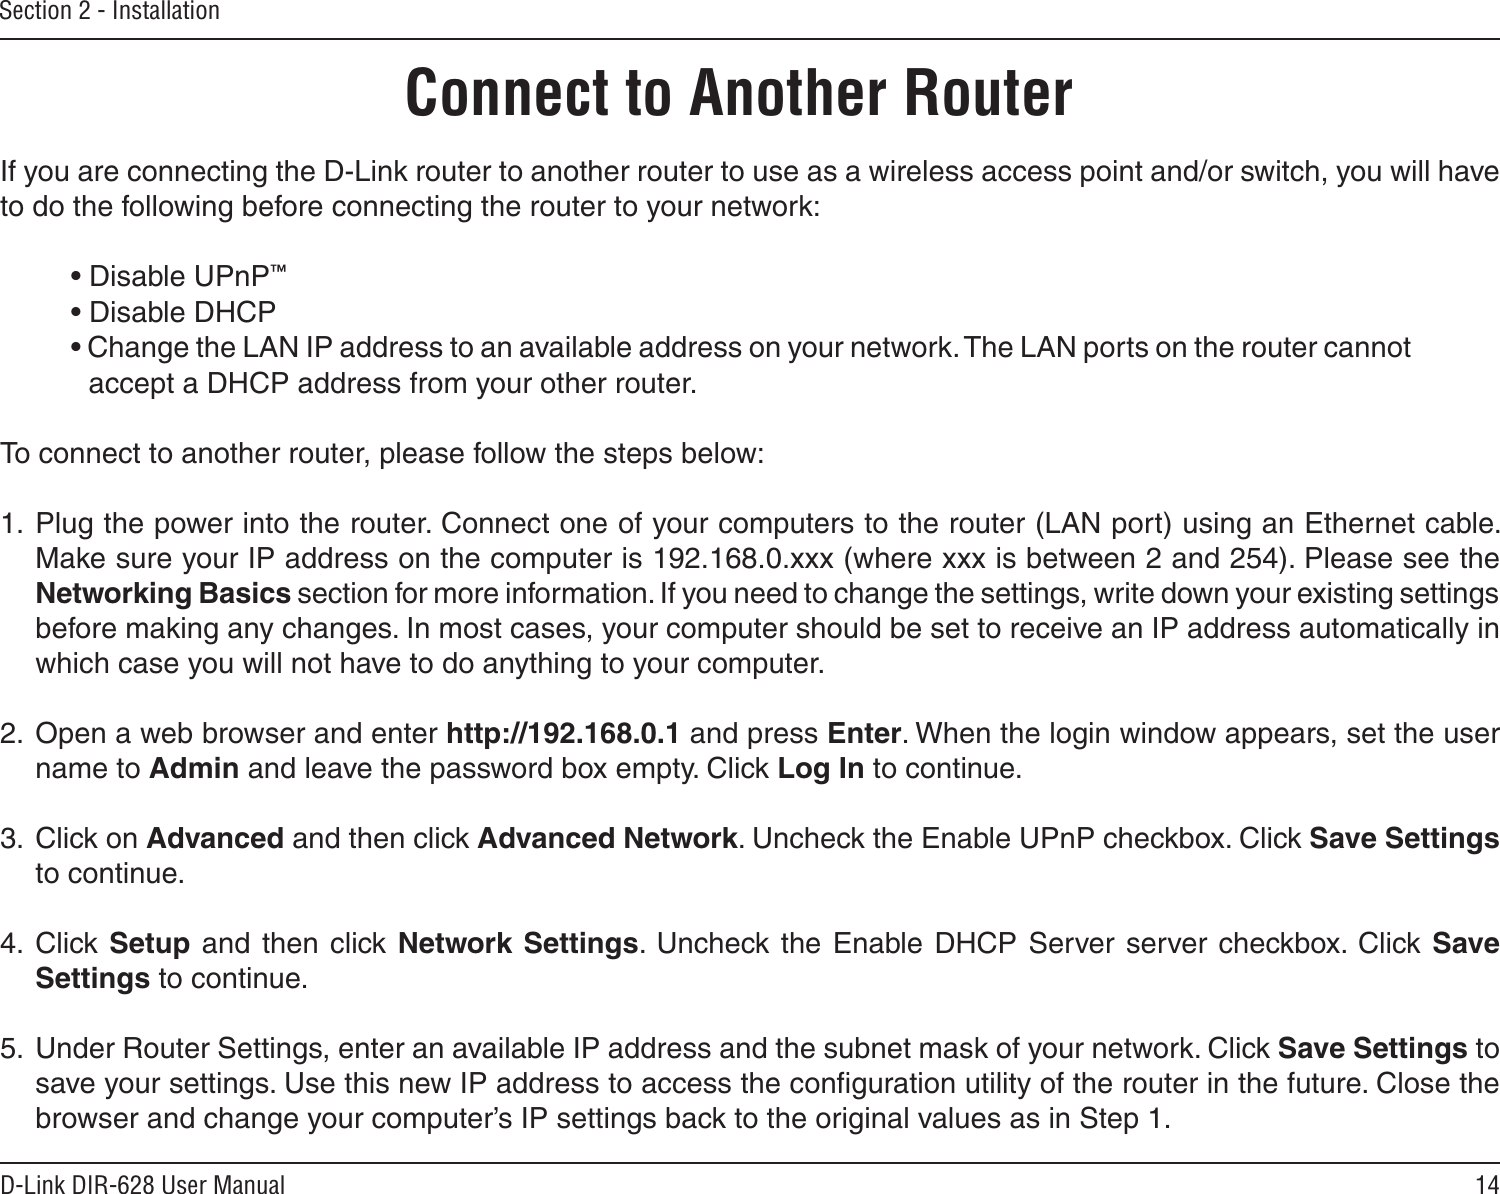 14D-Link DIR-628 User ManualSection 2 - InstallationIf you are connecting the D-Link router to another router to use as a wireless access point and/or switch, you will have to do the following before connecting the router to your network:• Disable UPnP™• Disable DHCP• Change the LAN IP address to an available address on your network. The LAN ports on the router cannot accept a DHCP address from your other router.To connect to another router, please follow the steps below:1.  Plug the power into the router. Connect one of your computers to the router (LAN port) using an Ethernet cable. Make sure your IP address on the computer is 192.168.0.xxx (where xxx is between 2 and 254). Please see the Networking Basics section for more information. If you need to change the settings, write down your existing settings before making any changes. In most cases, your computer should be set to receive an IP address automatically in which case you will not have to do anything to your computer.2.  Open a web browser and enter http://192.168.0.1 and press Enter. When the login window appears, set the user name to Admin and leave the password box empty. Click Log In to continue.3.  Click on Advanced and then click Advanced Network. Uncheck the Enable UPnP checkbox. Click Save Settings to continue. 4.  Click  Setup  and  then  click Network Settings. Uncheck  the Enable DHCP  Server server checkbox.  Click Save Settings to continue.5.  Under Router Settings, enter an available IP address and the subnet mask of your network. Click Save Settings to save your settings. Use this new IP address to access the conﬁguration utility of the router in the future. Close the browser and change your computer’s IP settings back to the original values as in Step 1.Connect to Another Router